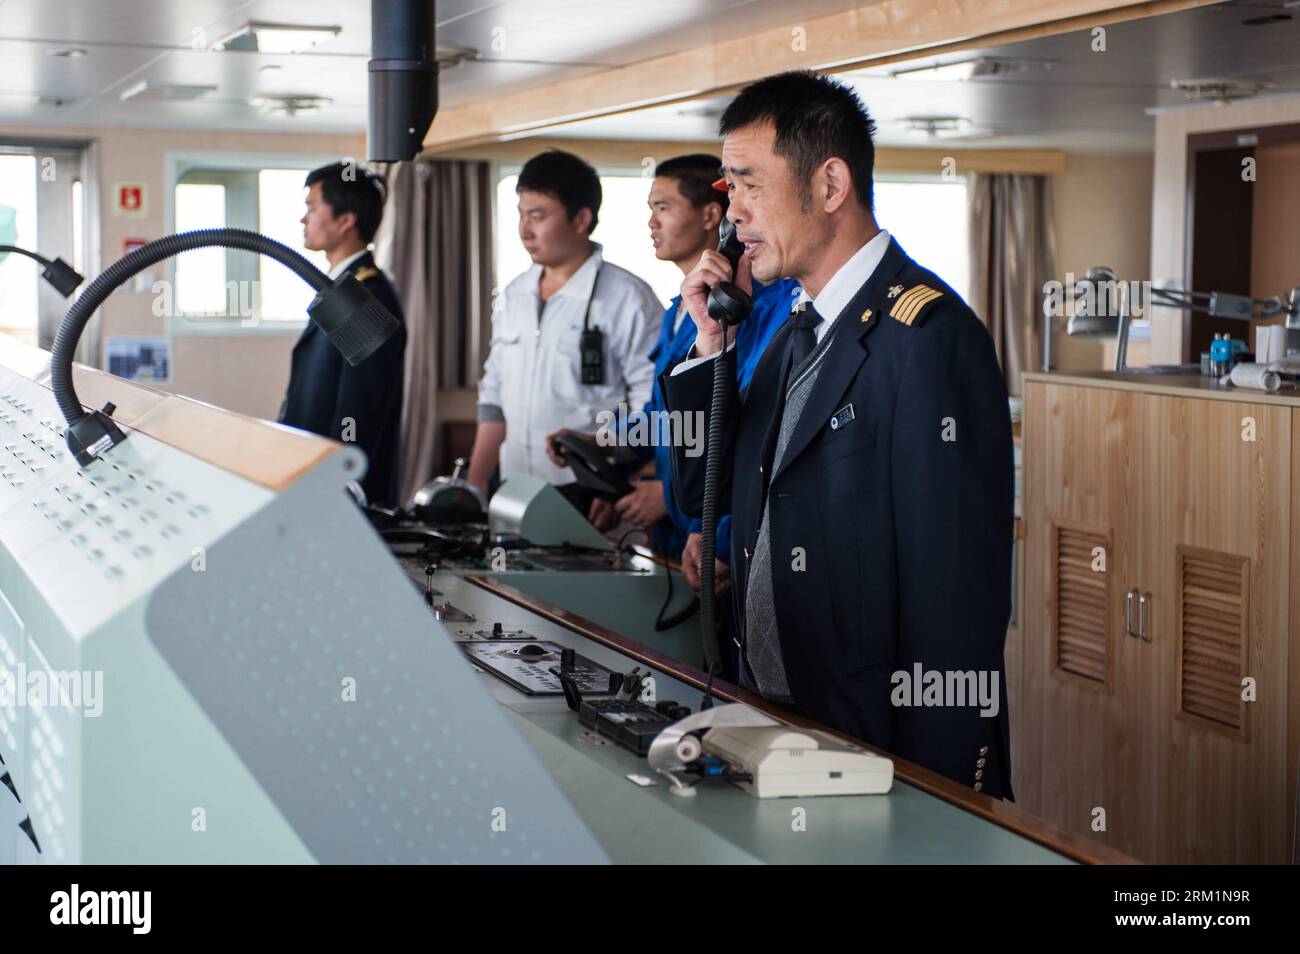 Bildnummer: 59604347  Datum: 24.04.2013  Copyright: imago/Xinhua NANJING, 2013 -- Wang Lianmiao (1st R) contacts nearby ships via high frequency radio aboard the Maple Star on the Yangtze River in east China s Jiangsu Province, April 24, 2013. Wang Lianmiao and Zhu Hui arrived at the port of Jingjiang on the morning of April 24, 2013. Both men are inland waterway pilots from the Yangtze River Pilot Centre. Awaiting them was the Maple Star, a 180-meter-long Marshall Islands-flagged cargo ship with a gross register tonnage of over 23,000. Under their pilotage, the Maple Star was to veer 180 degr Stock Photo